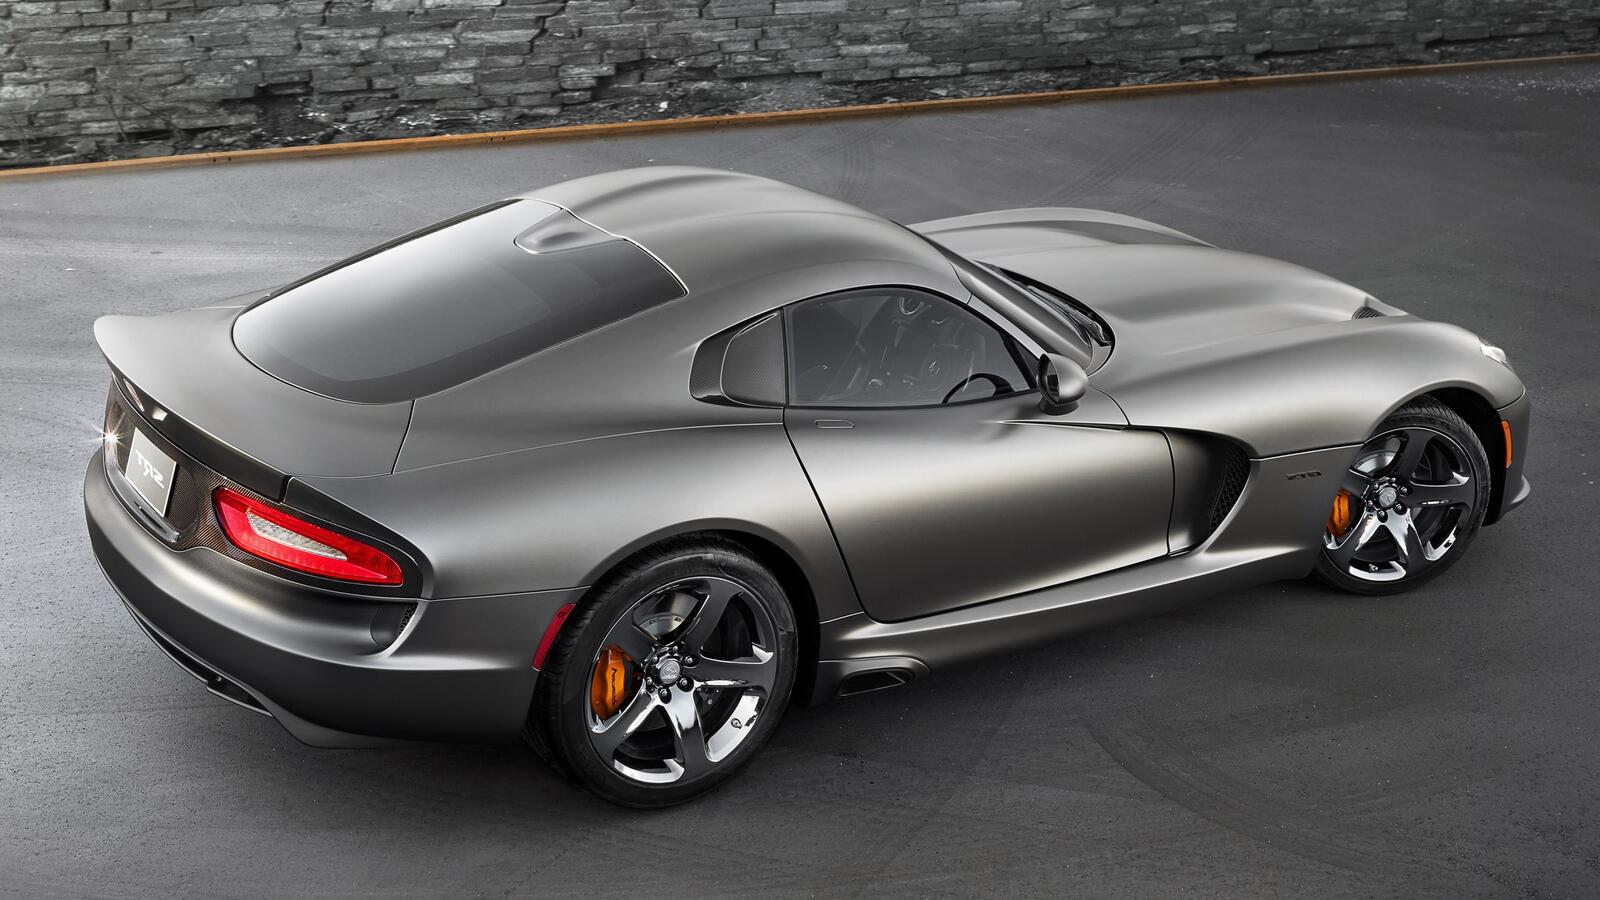 Wallpapers Dodge Viper cars gray on the desktop